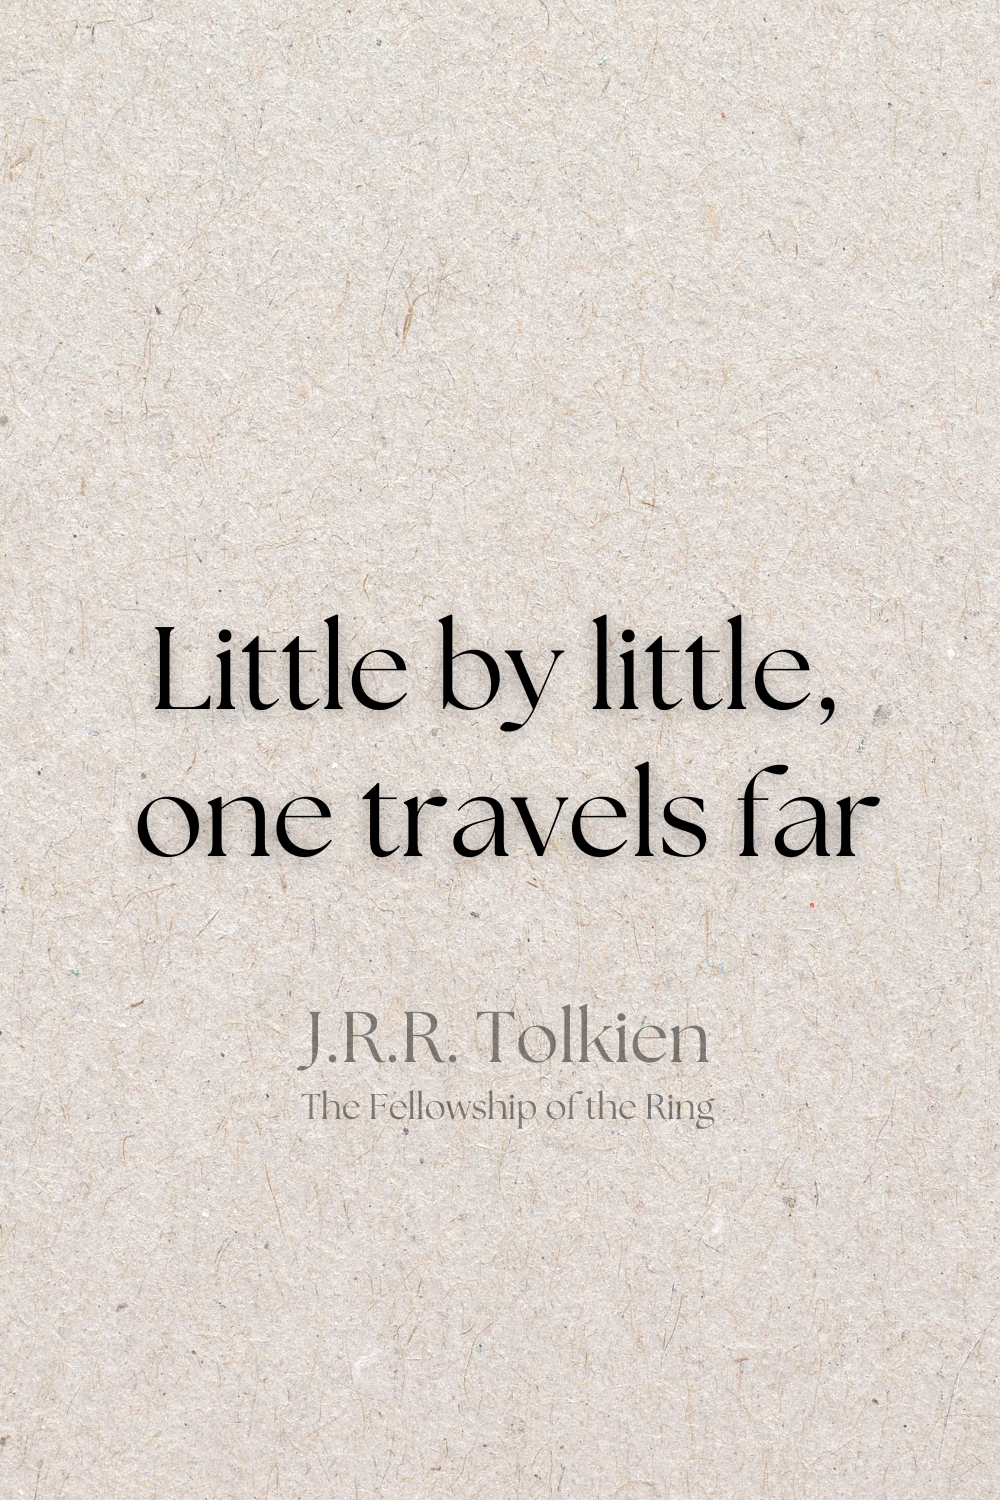 Lord of the rings quotes - little by little, one travel far.  J.r.r Tolkien